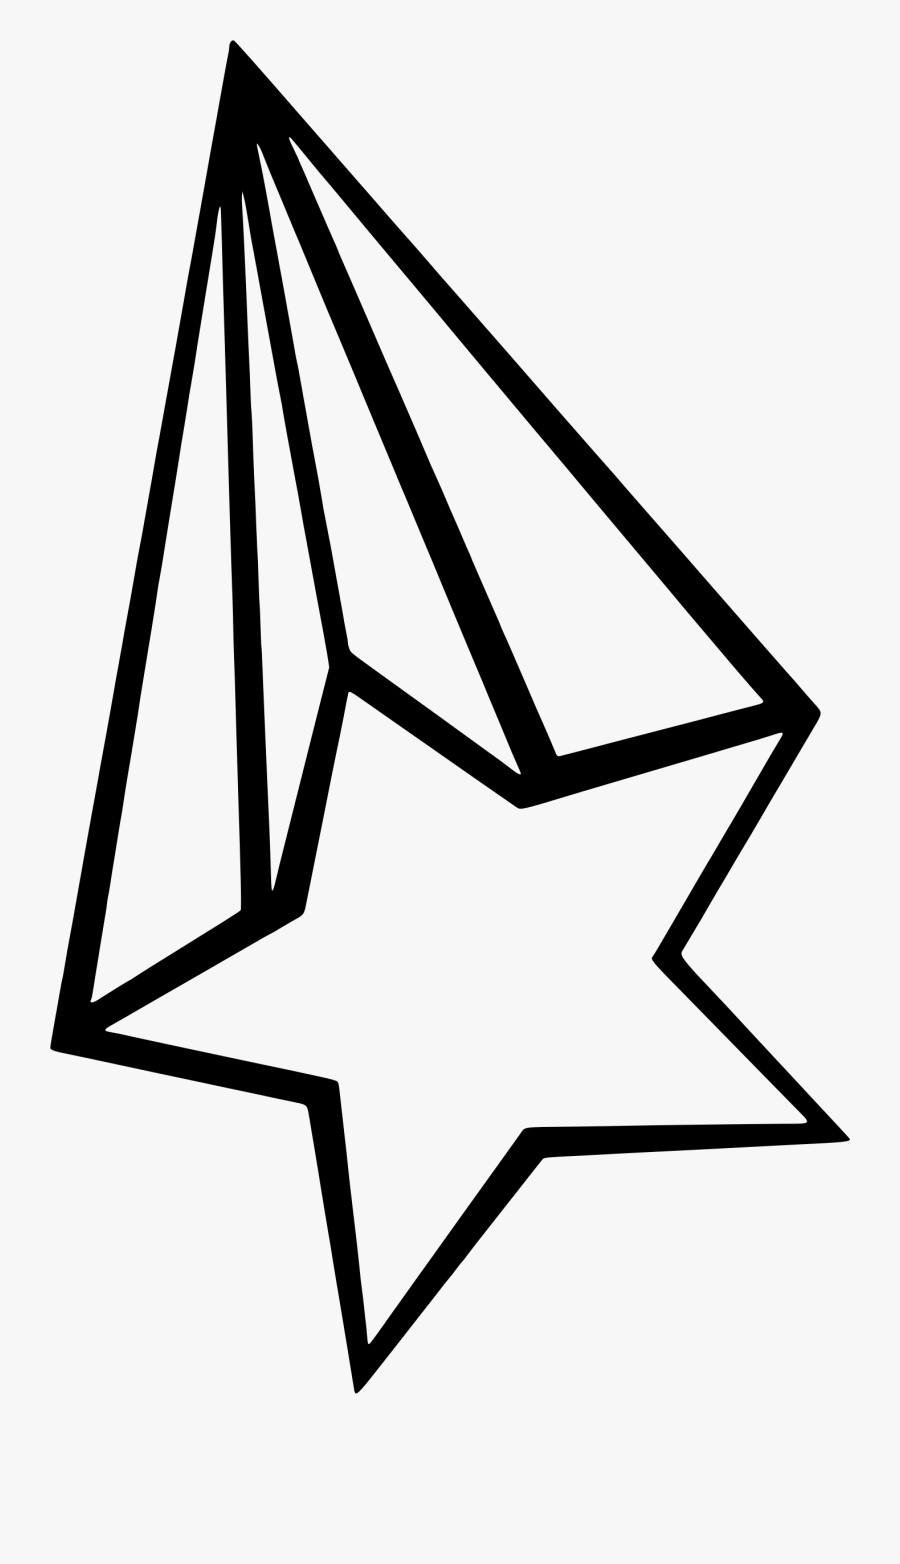 Clip Art Shooting Star Clipart Black And White - Shooting Star Clipart Black And White, Transparent Clipart